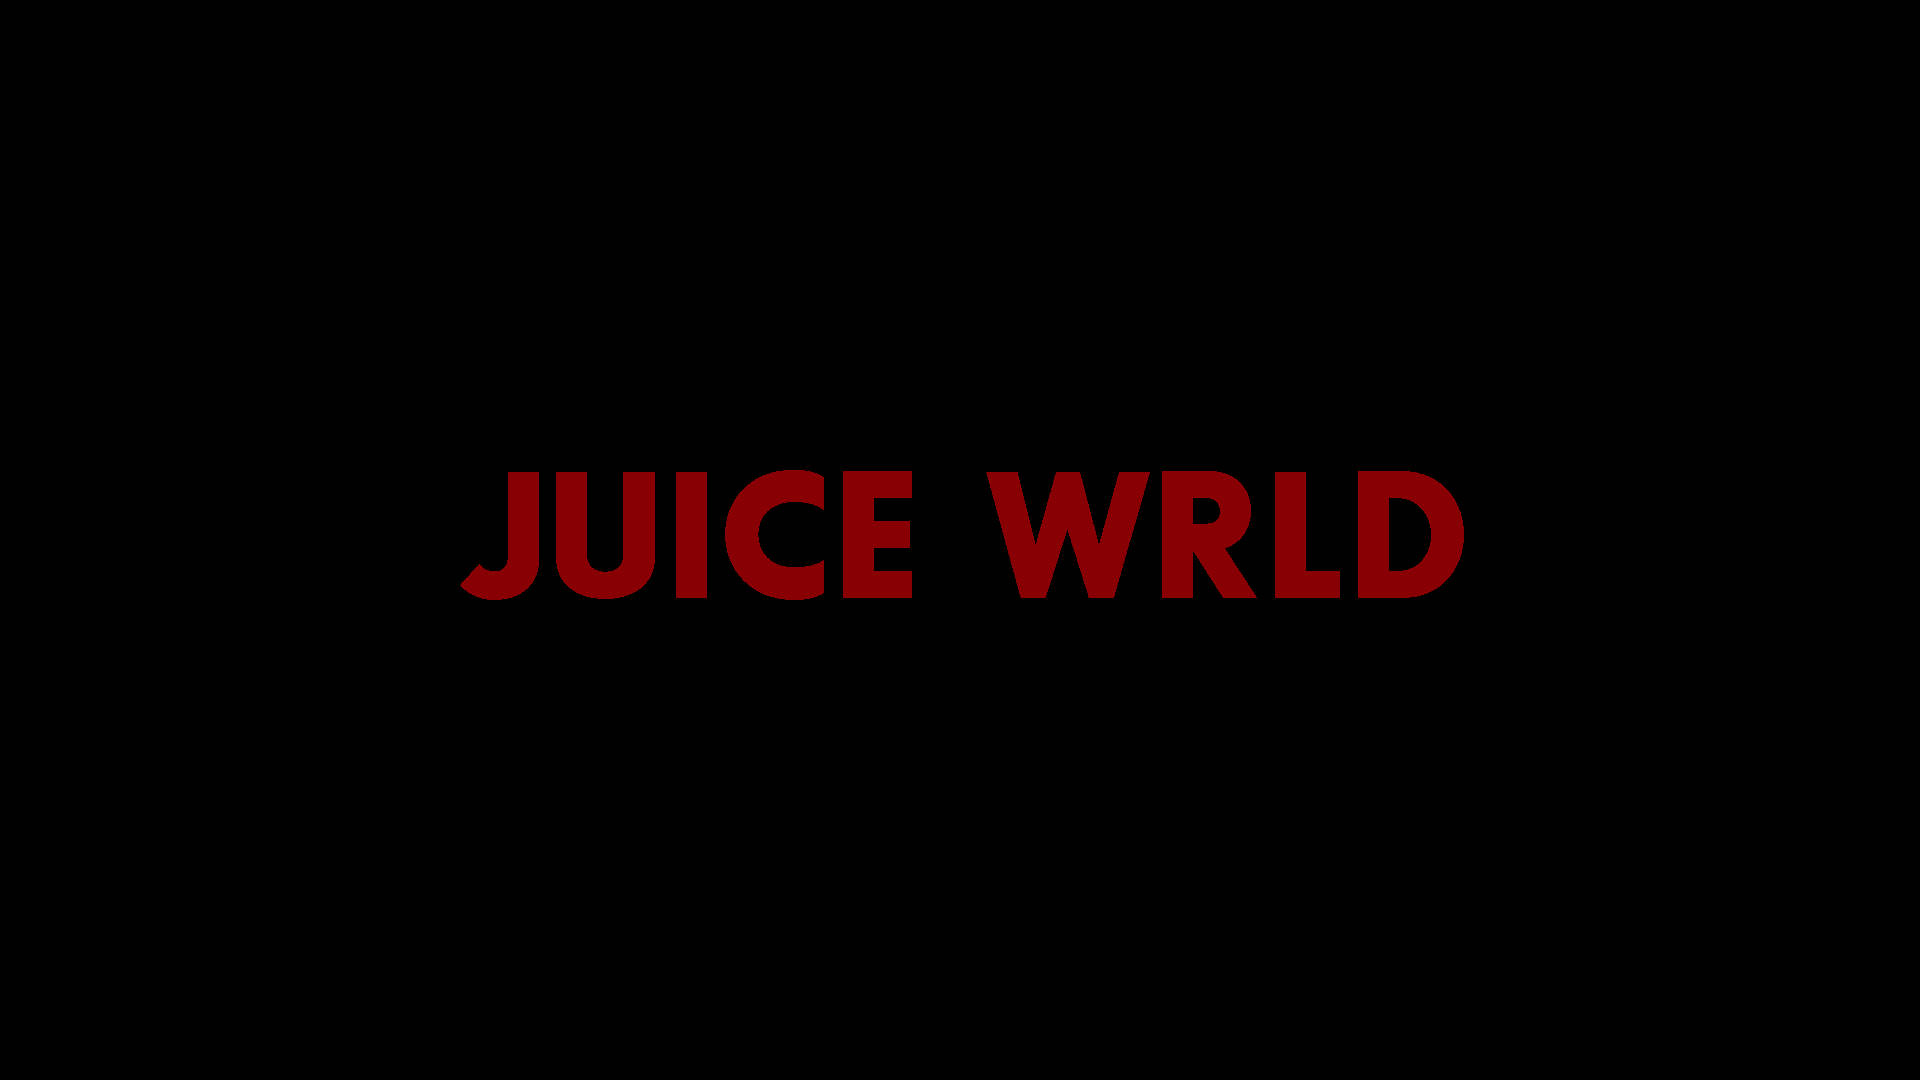 Juice World in bold red text wallpaper.